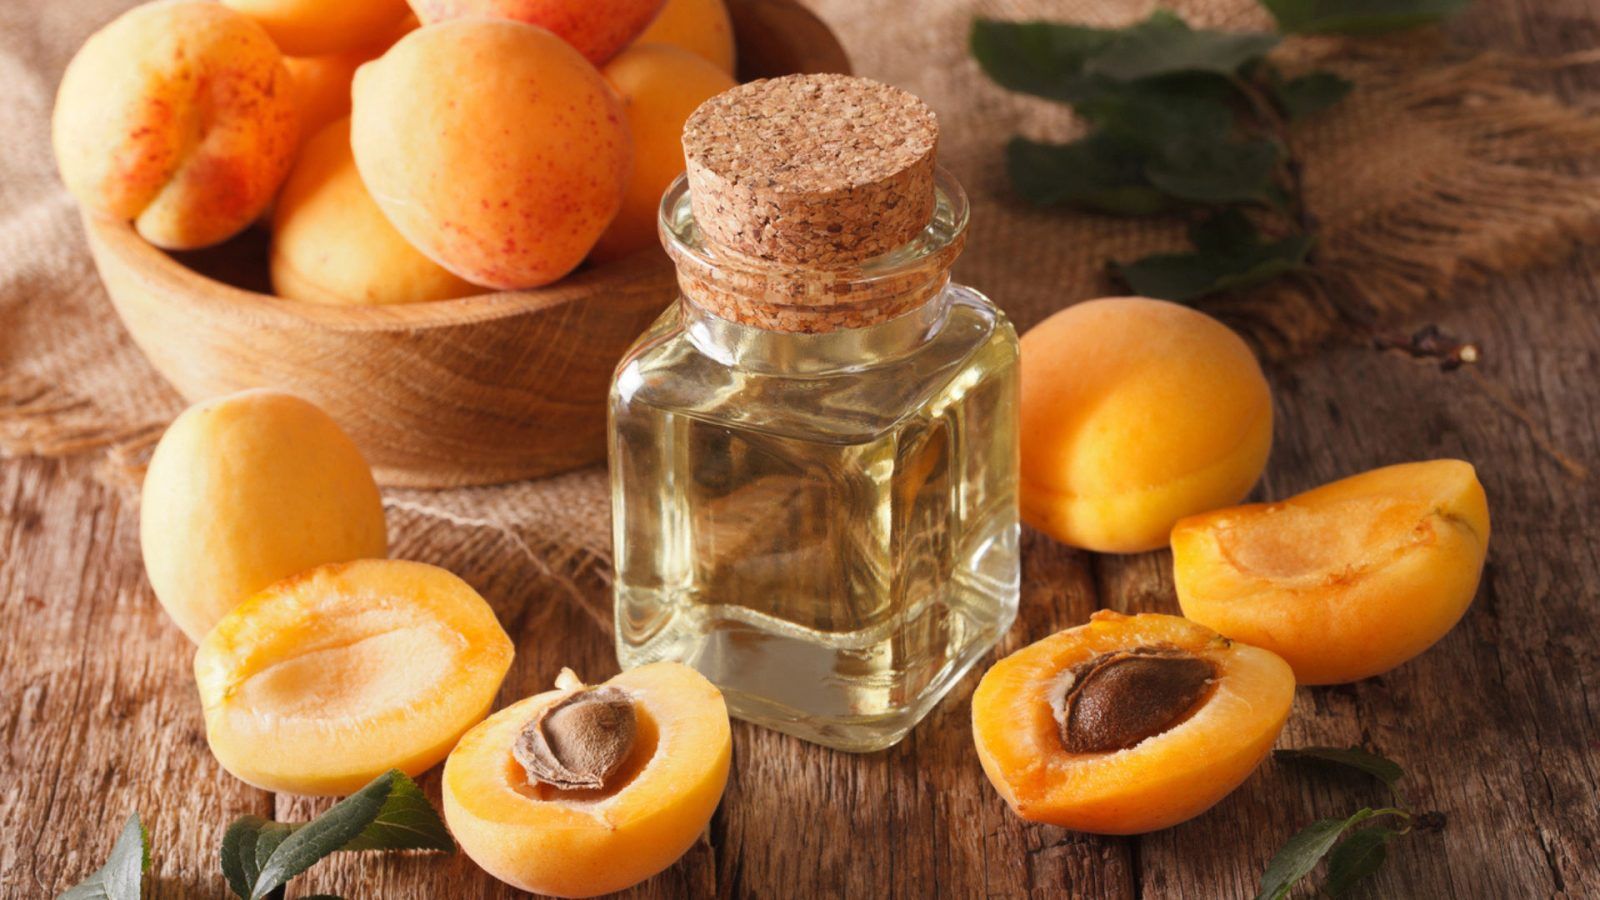 Apricot oil for hair and skin: How to use this natural beauty powerhouse